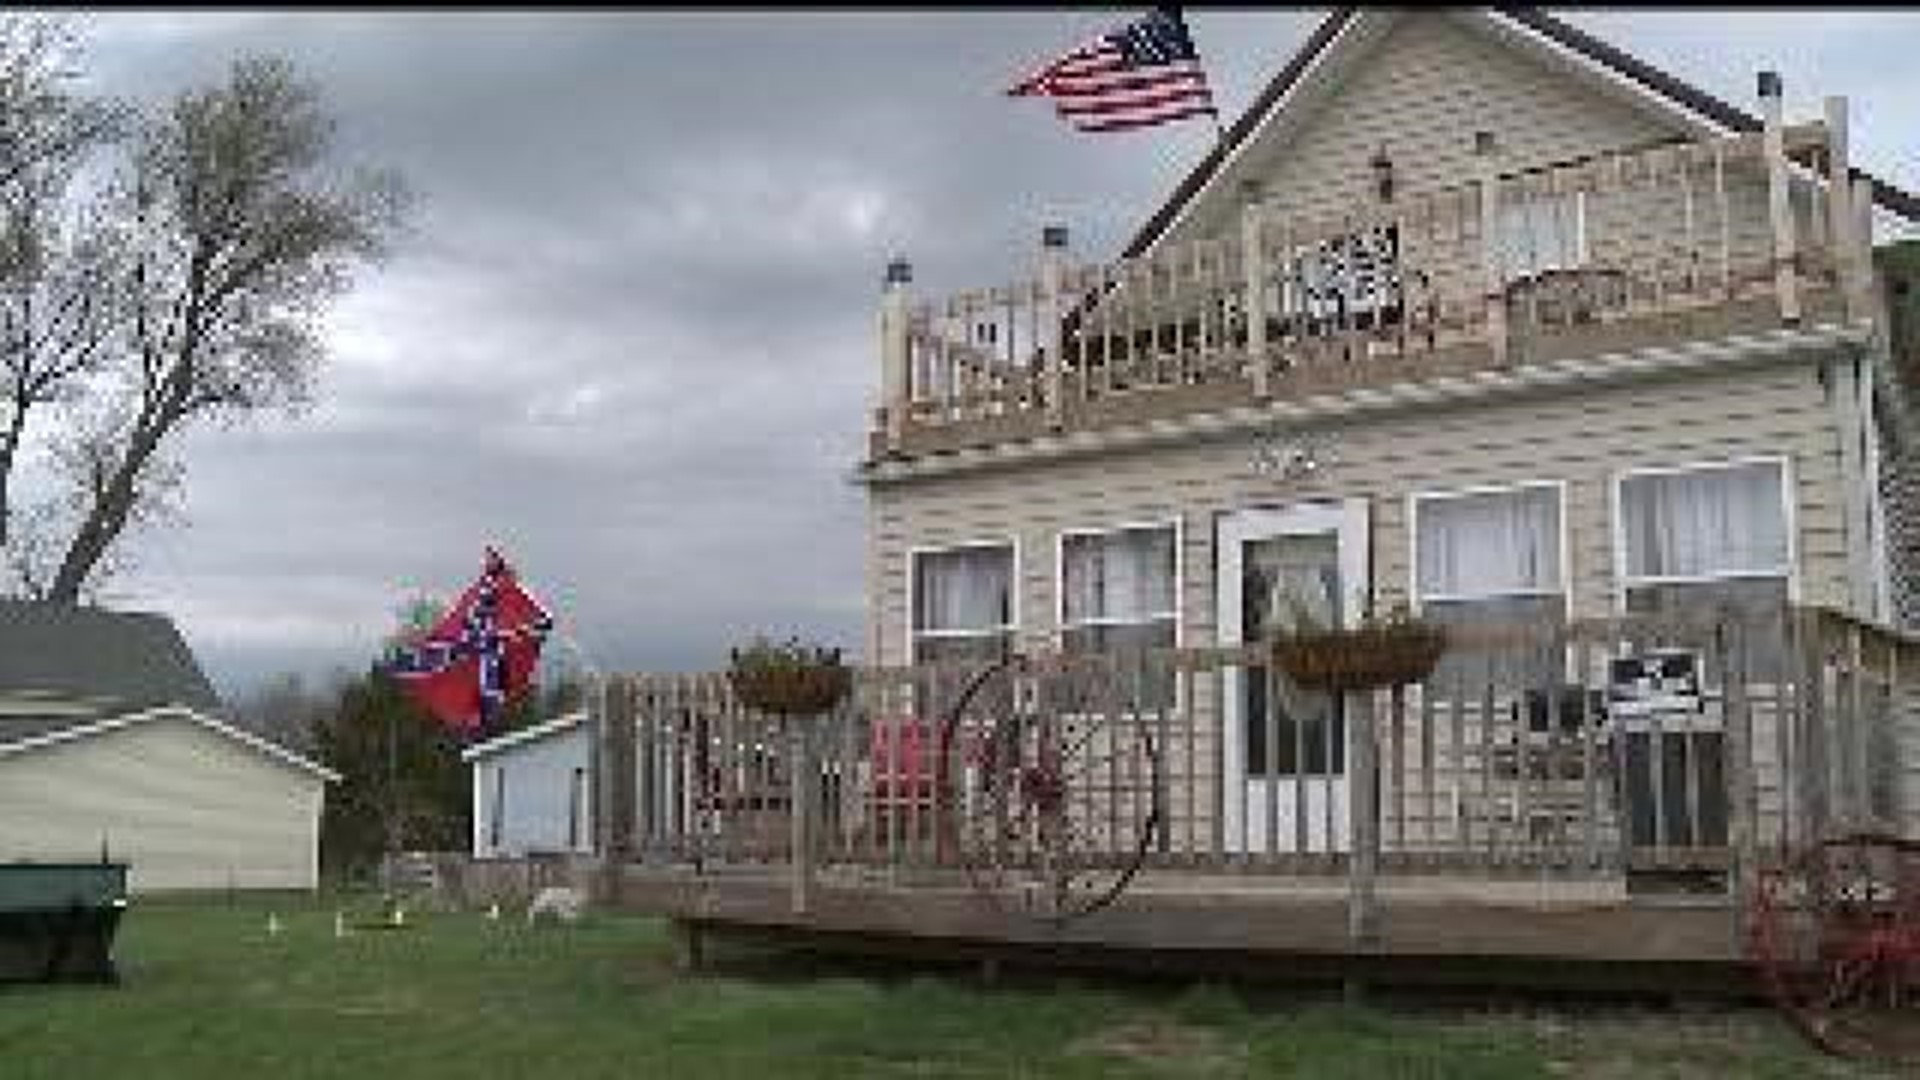 Town conflicted over flag flown at mayor's house